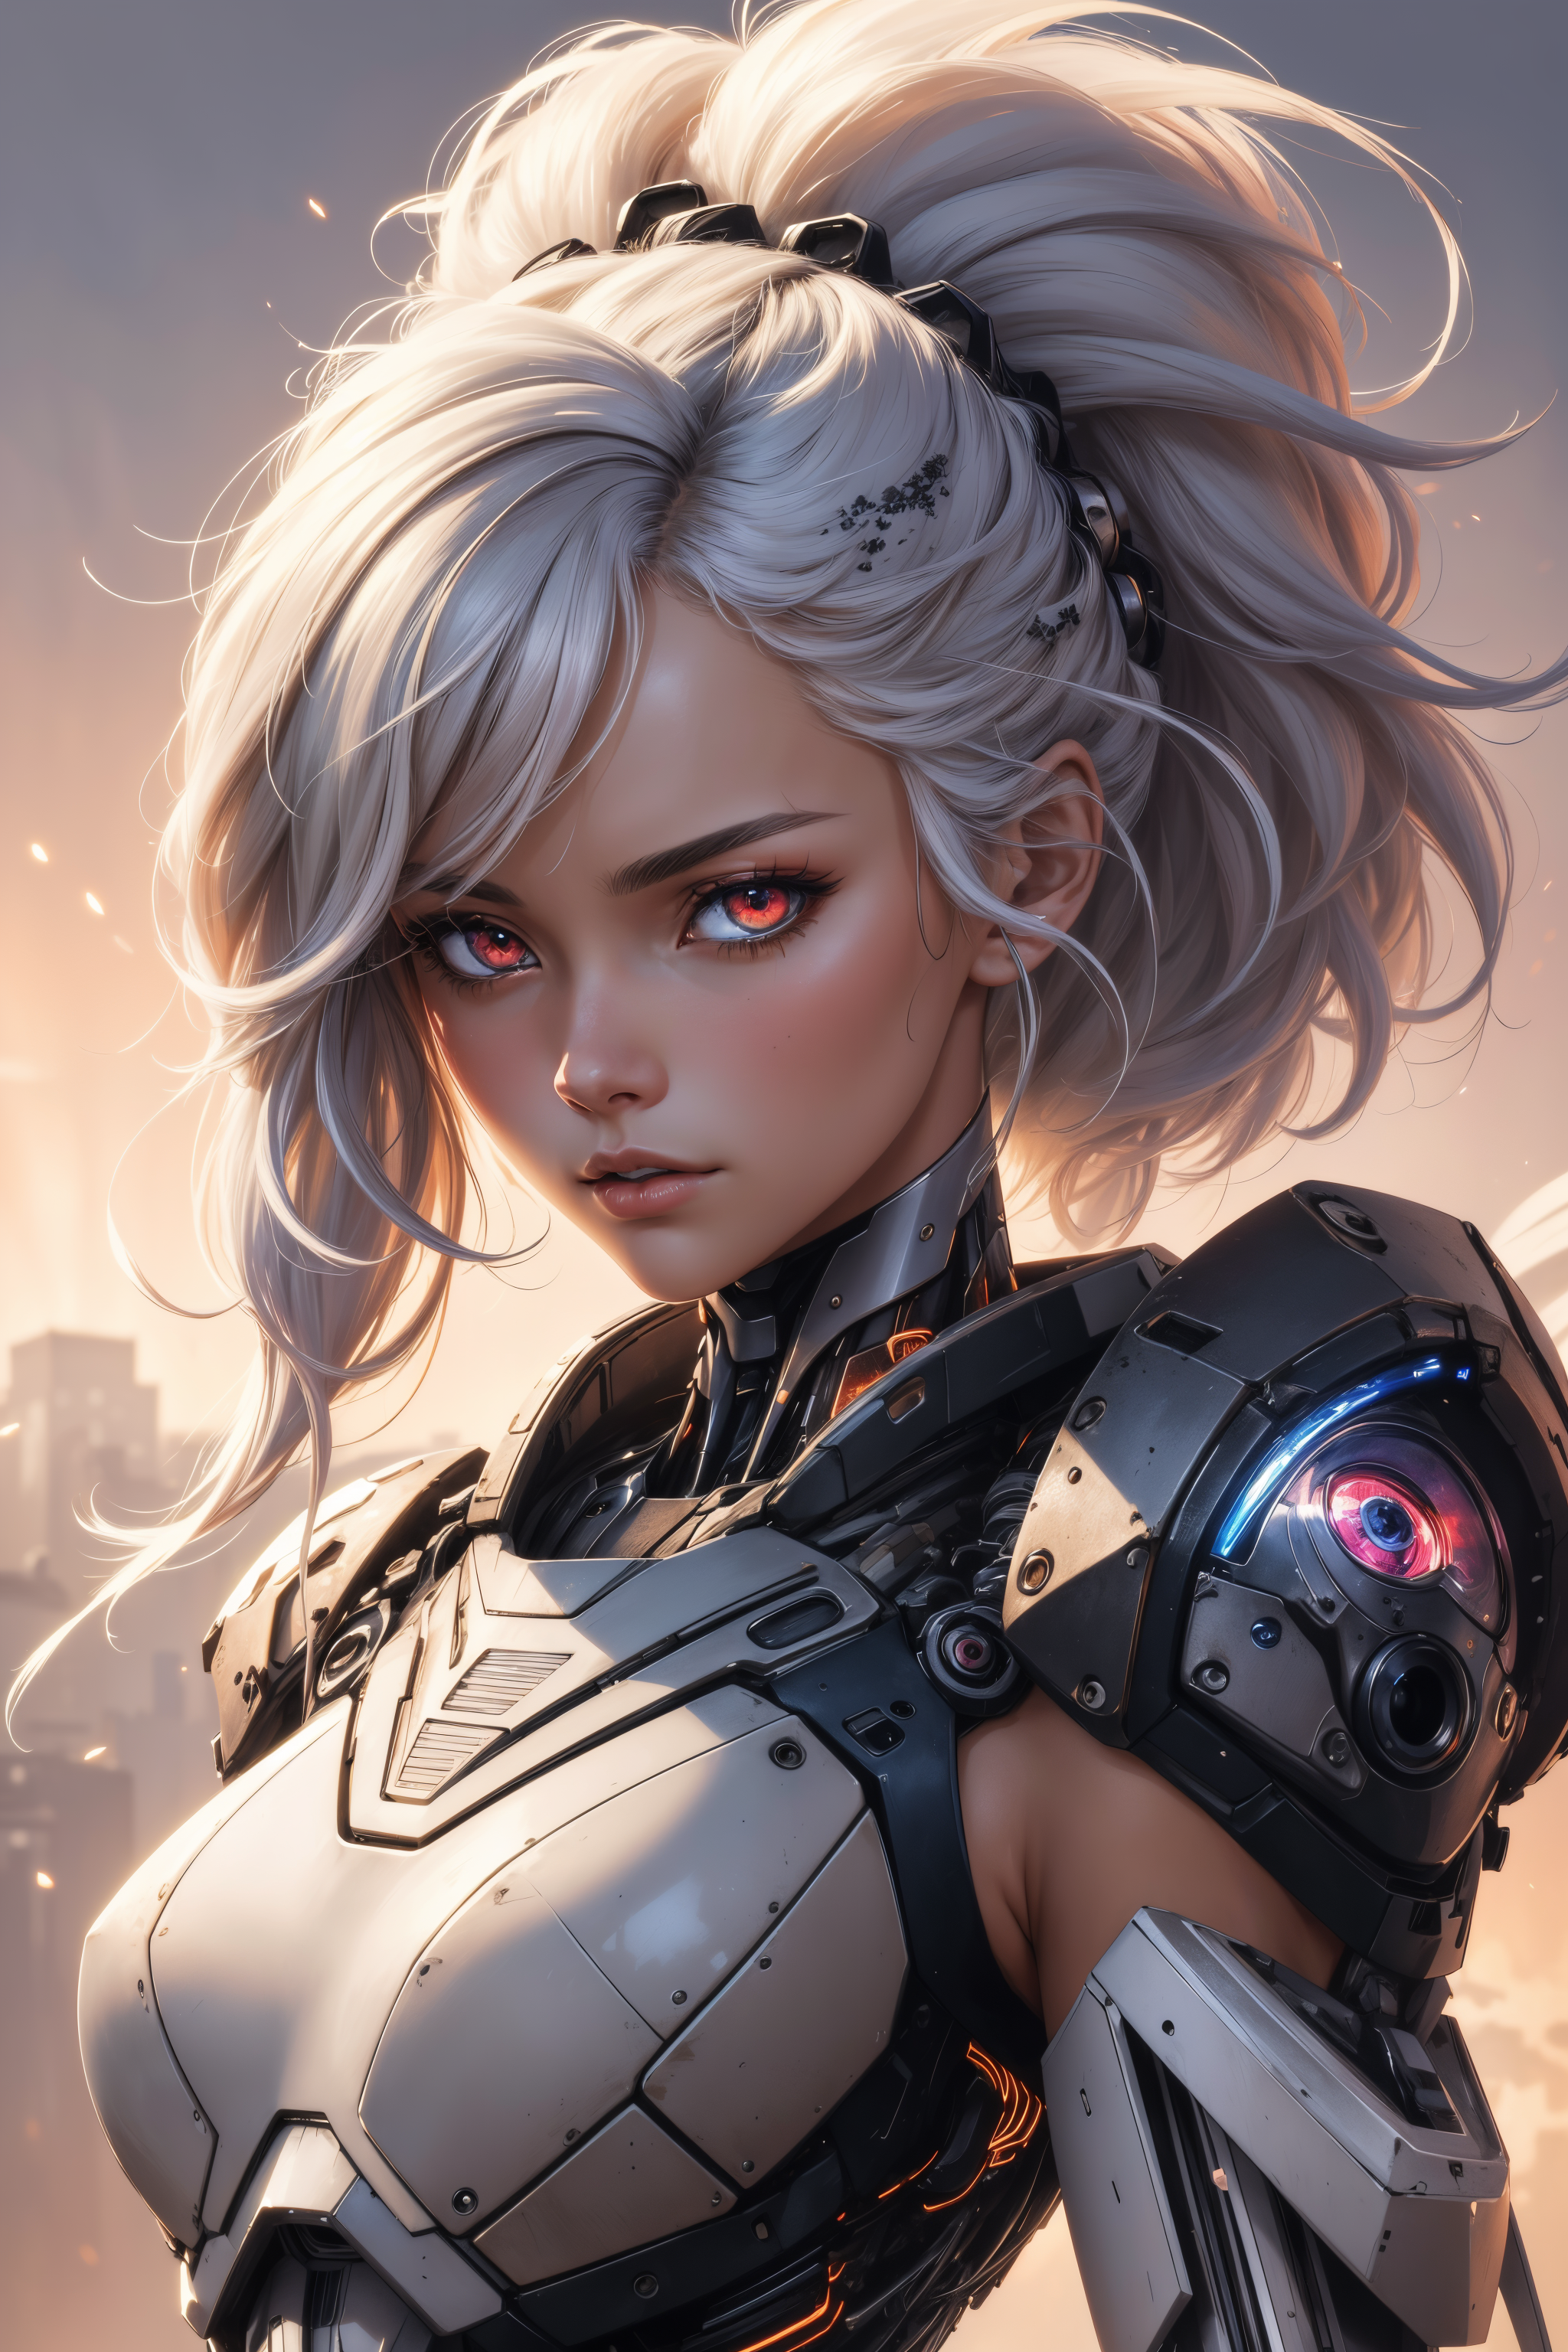 (masterpiece:1.1), (highest quality:1.1), (HDR:1.0), extreme quality, cg, (anime wallpaper), stylized, detailed face+eyes,...